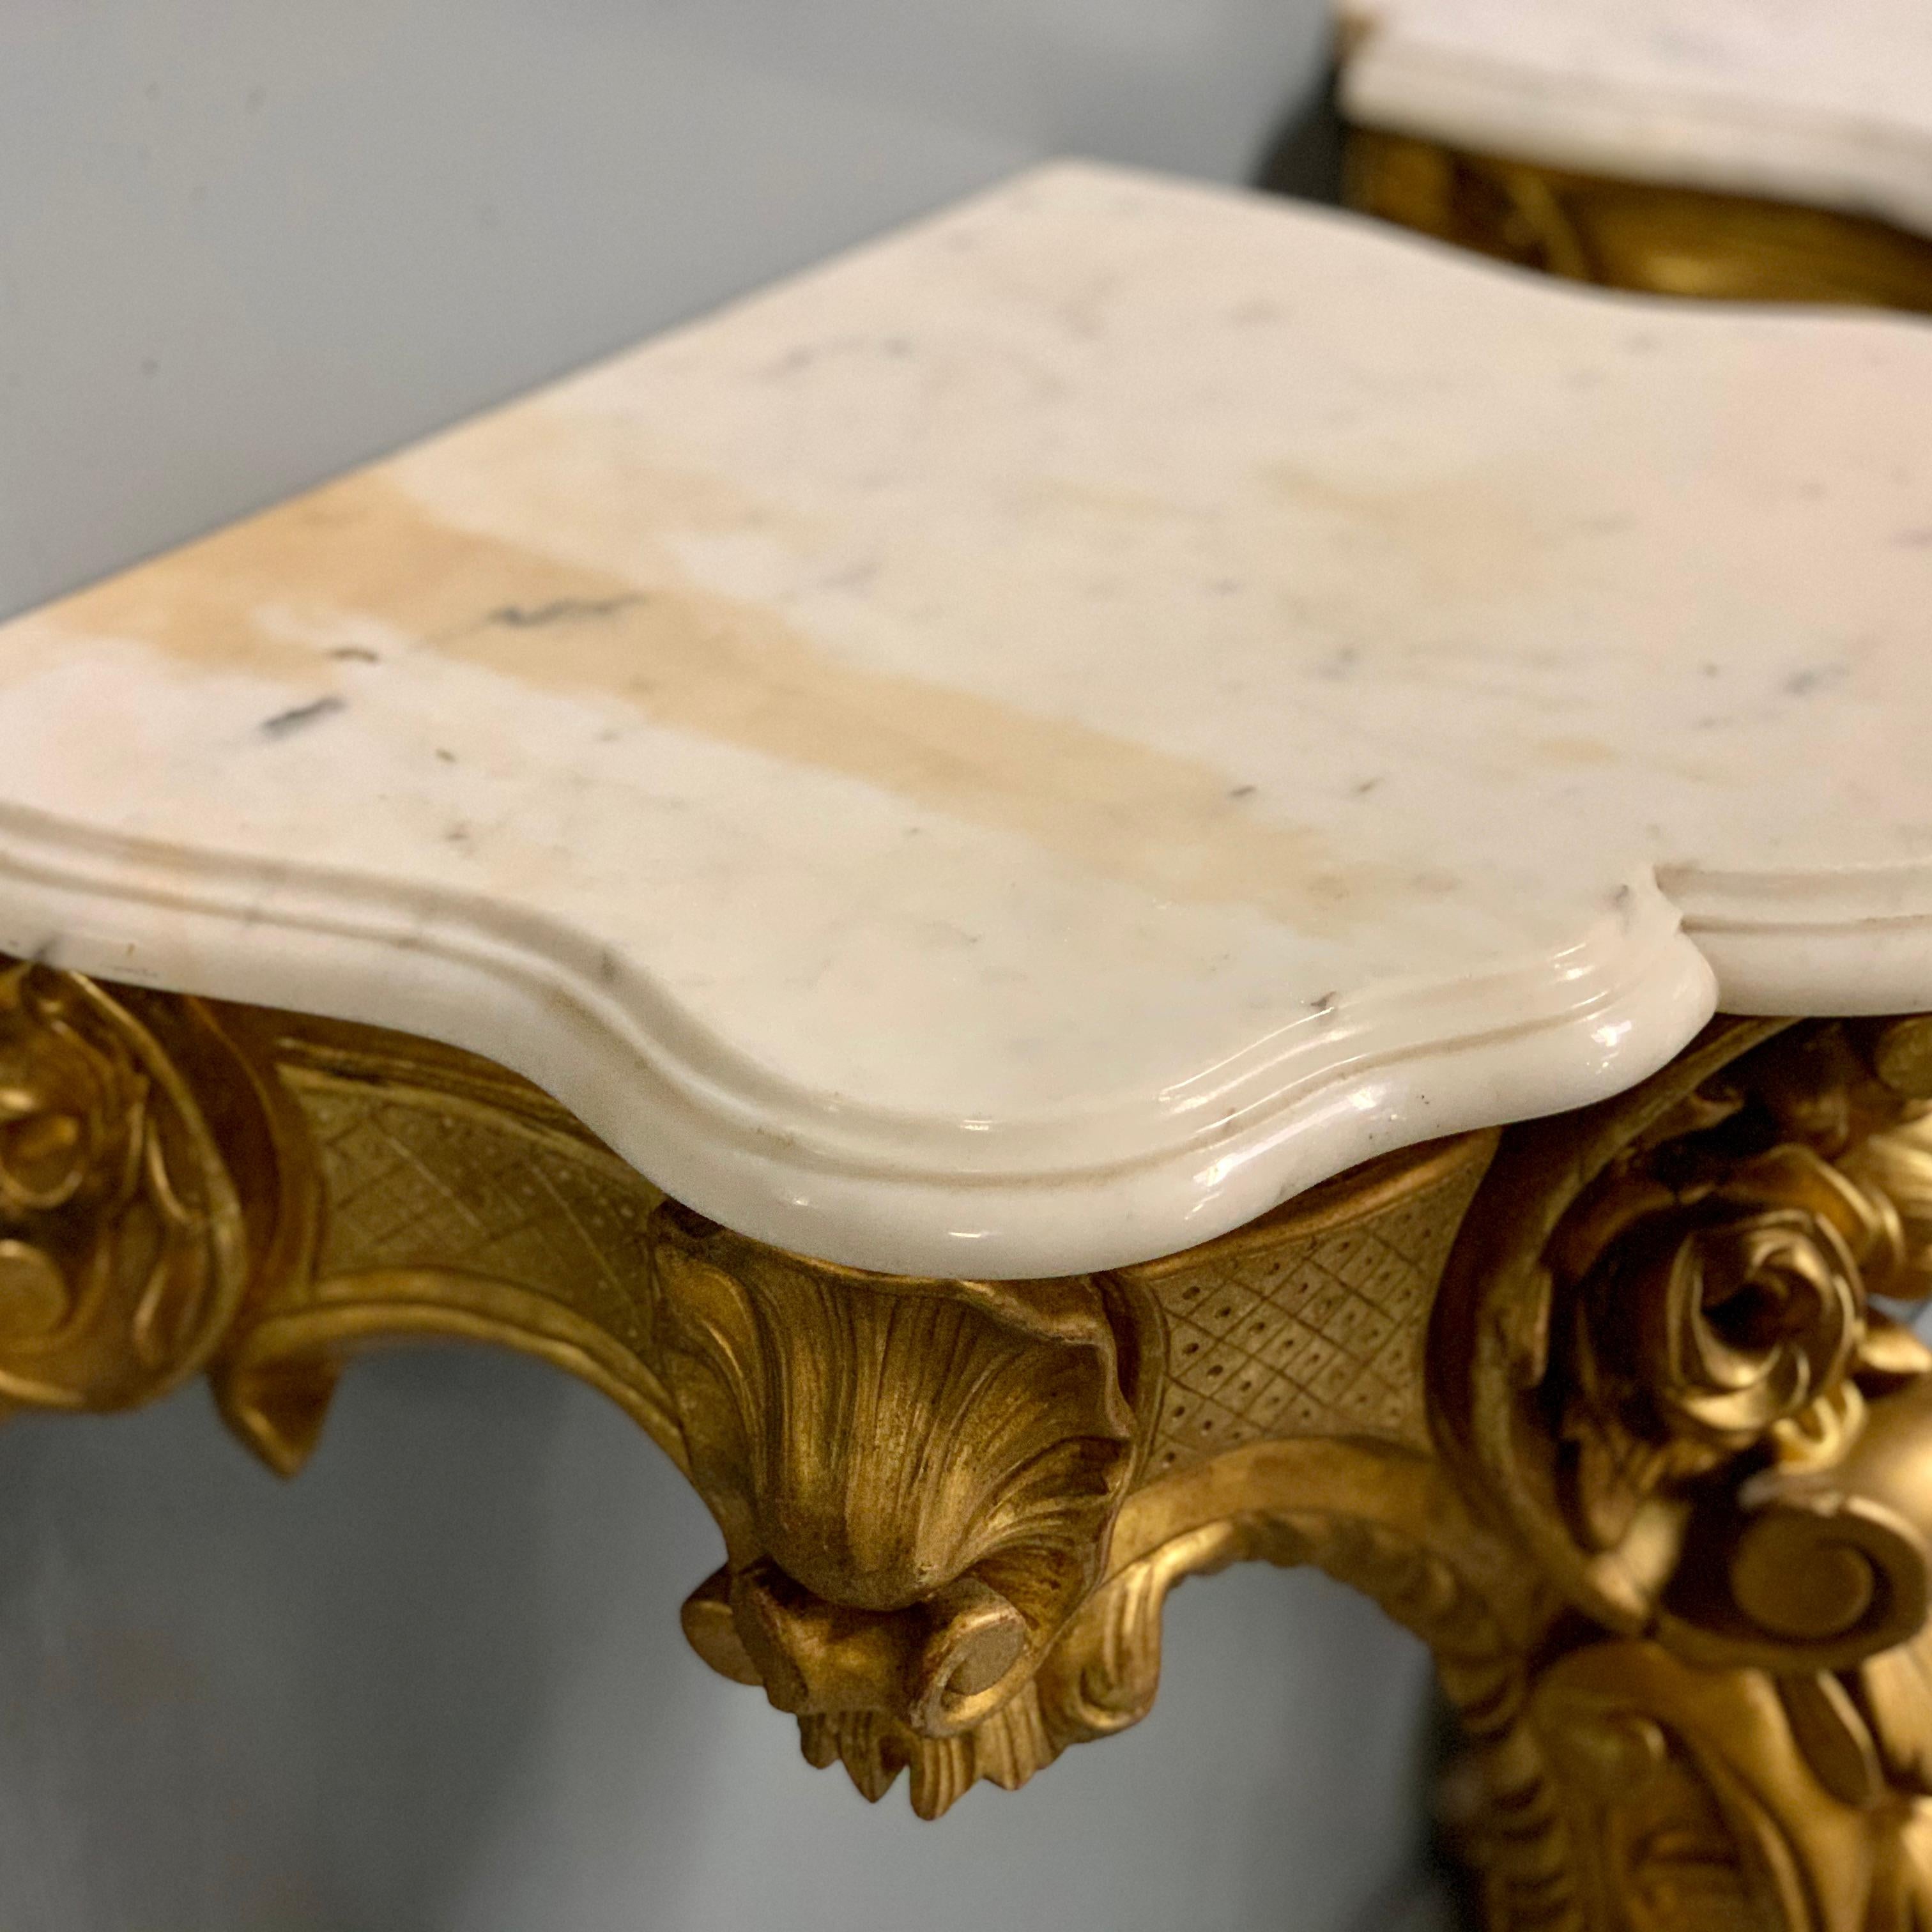 Carrara Marble 19th Century French Pair of Gilt Wall Mounted Console Tables with Marble Tops For Sale